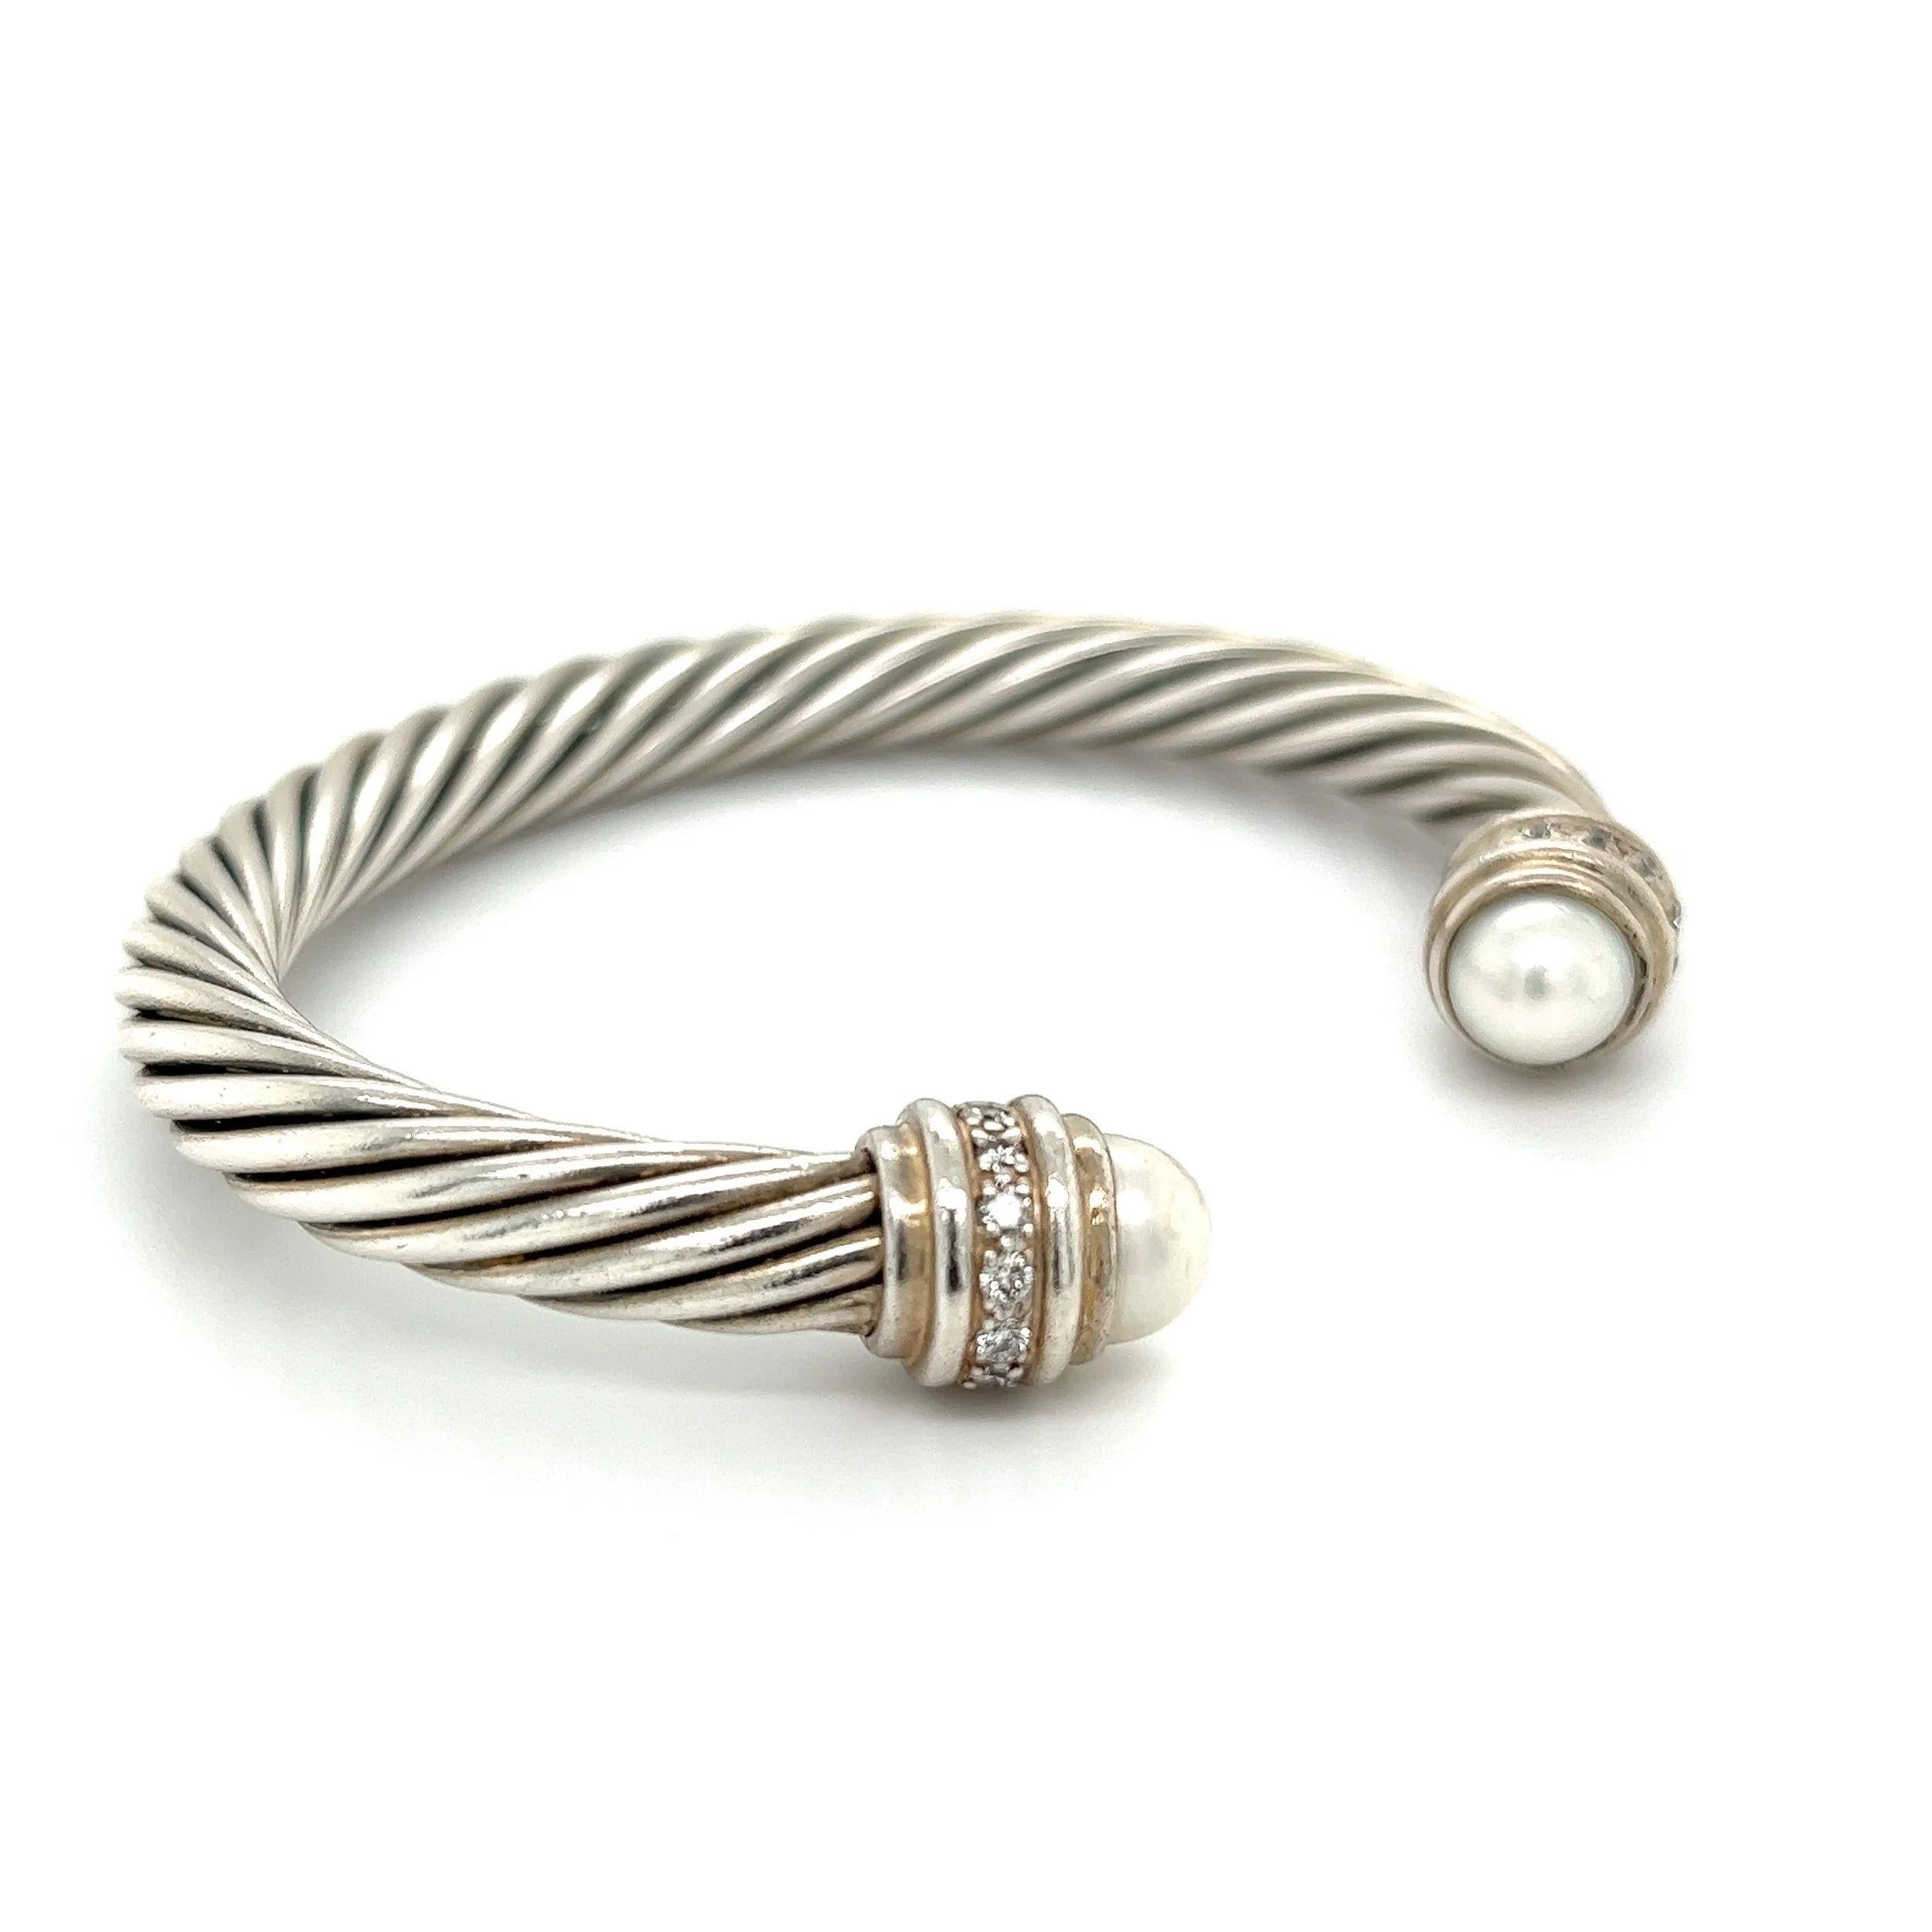 Simply Beautiful! Iconic David Yurman 7.8mm Pearl and Pavé Diamond, weighing approx. 0.41tcw Sterling Silver Classic Cable Cuff Bangle Bracelet. Hand crafted in 925 Sterling Silver. Opening for convenient slipping off and on. More Beautiful in Real